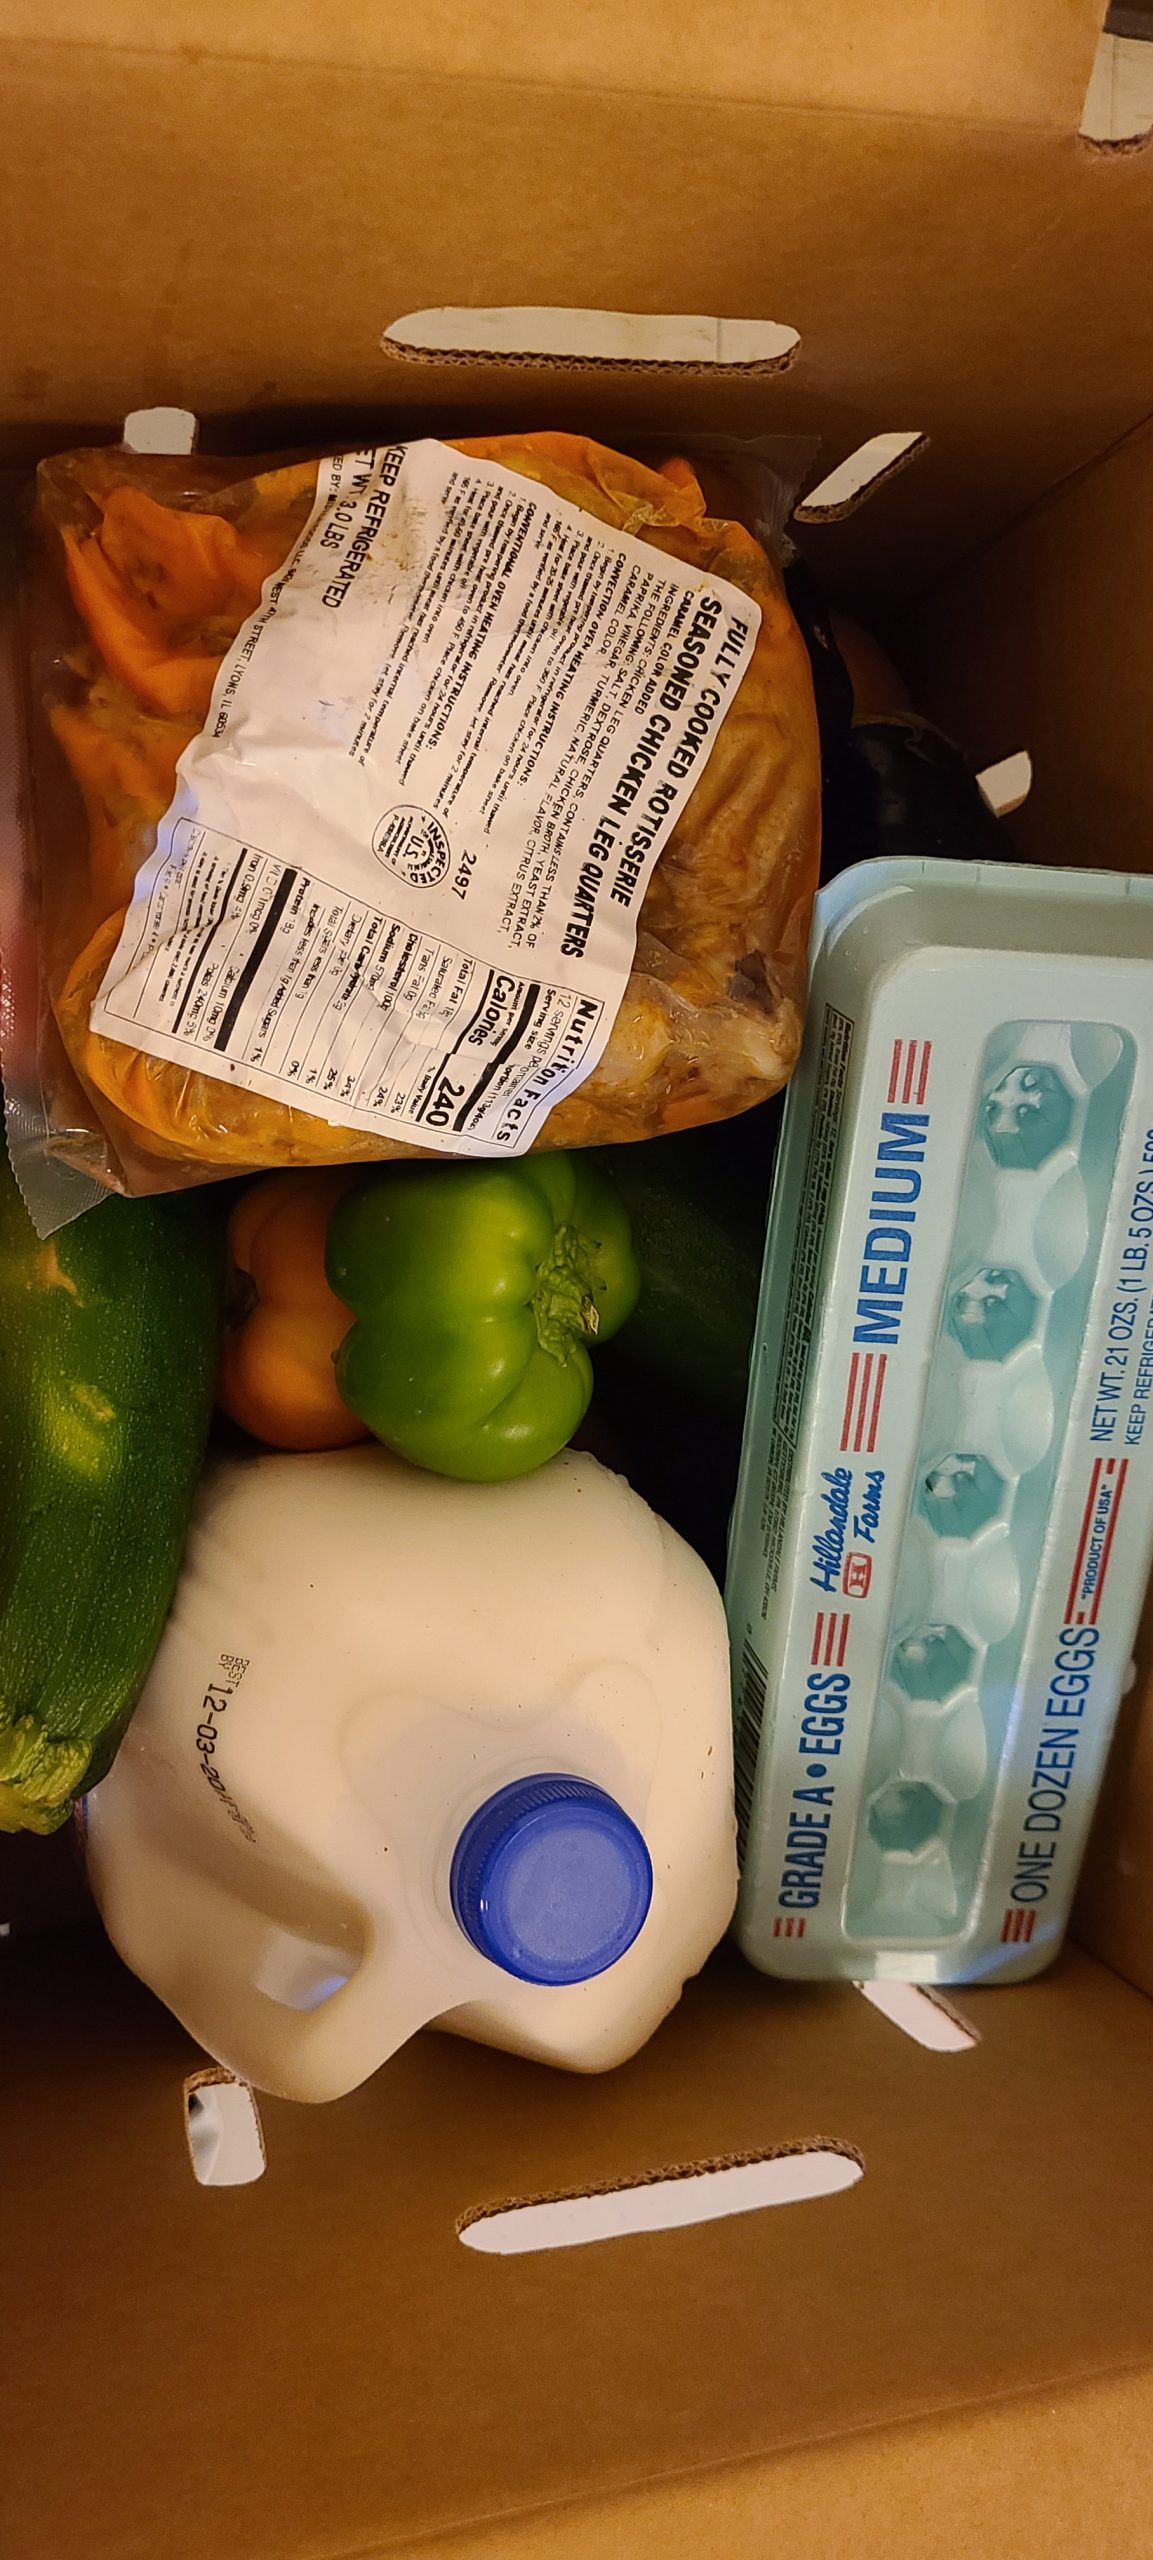 Box of food items including milk, eggs, zucchini, bell peppers, and fully cooked chicken.